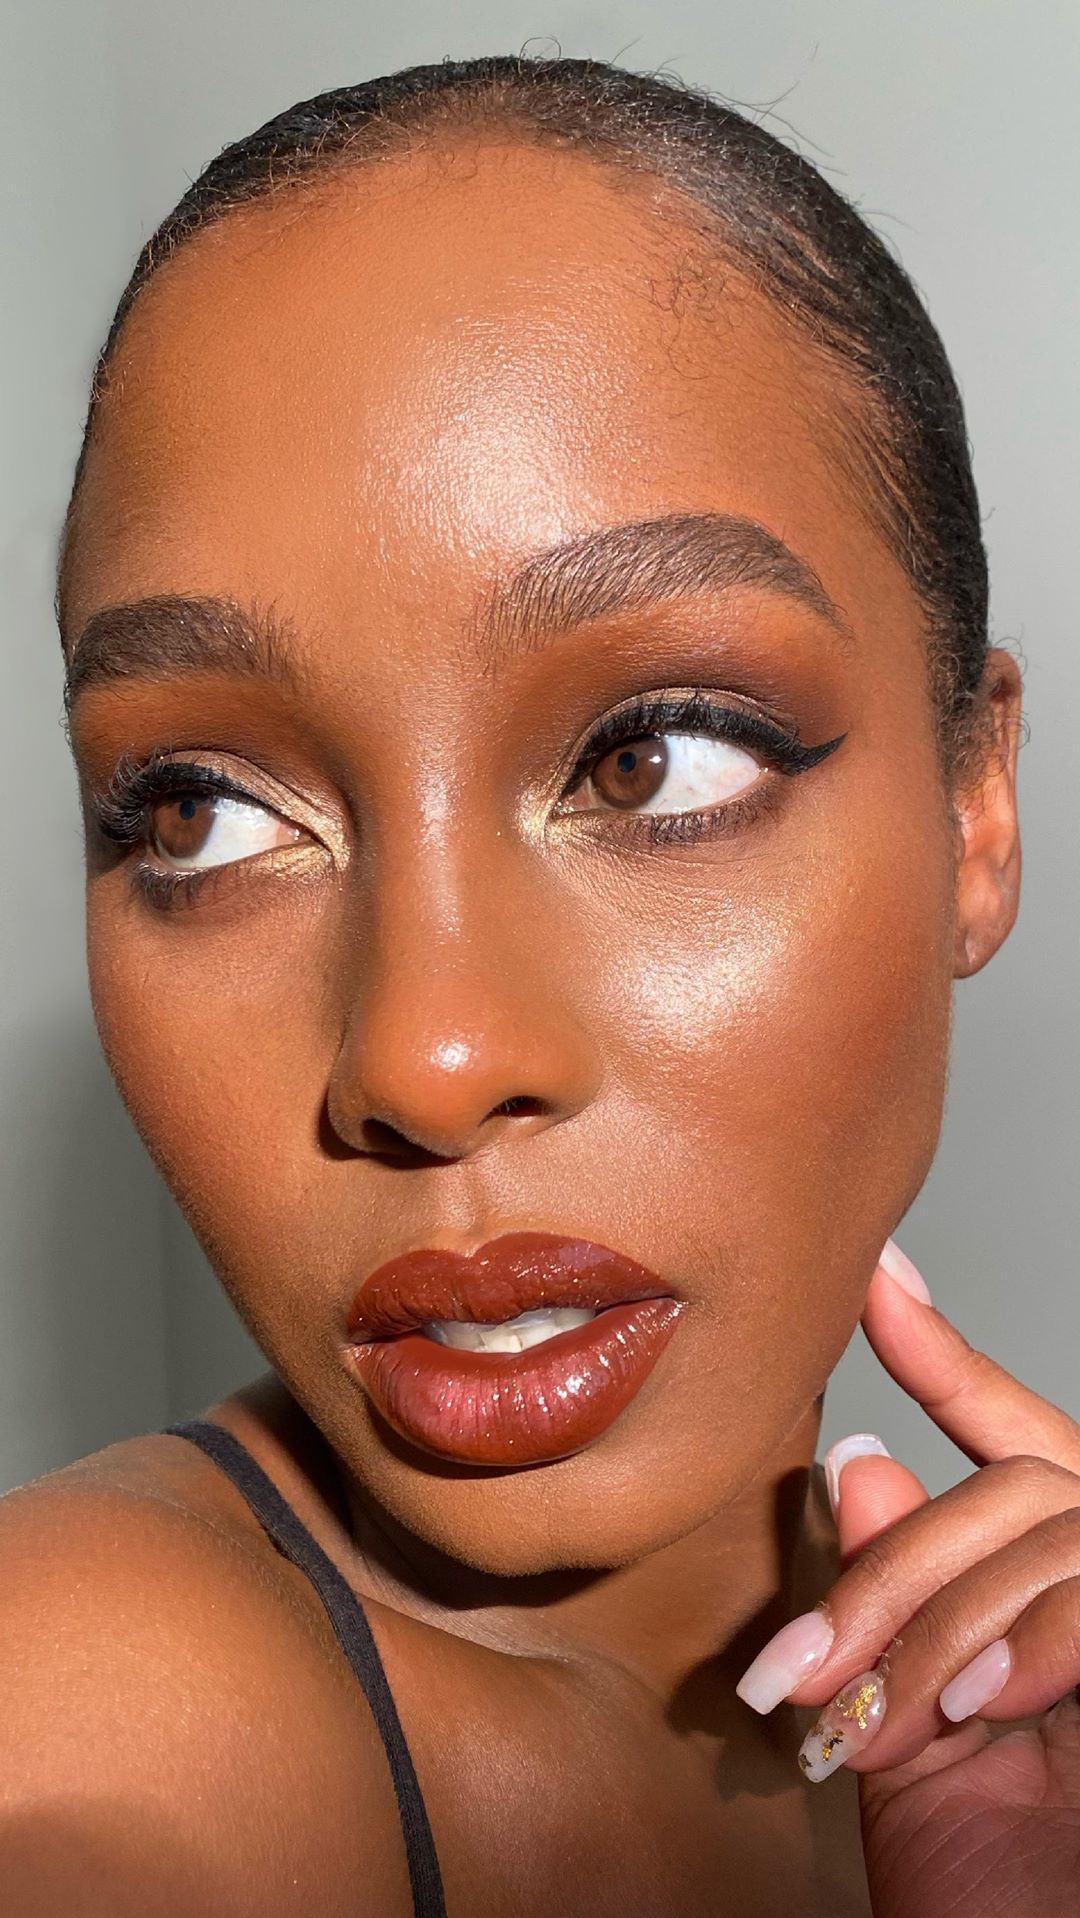 Maybelline New York - This is a look! 🔥 Watch @kilprity create this Fall makeup look using the products below! Let us know in the comments if you’re recreating this glam! #maybellinexkilprity 

Get Th...